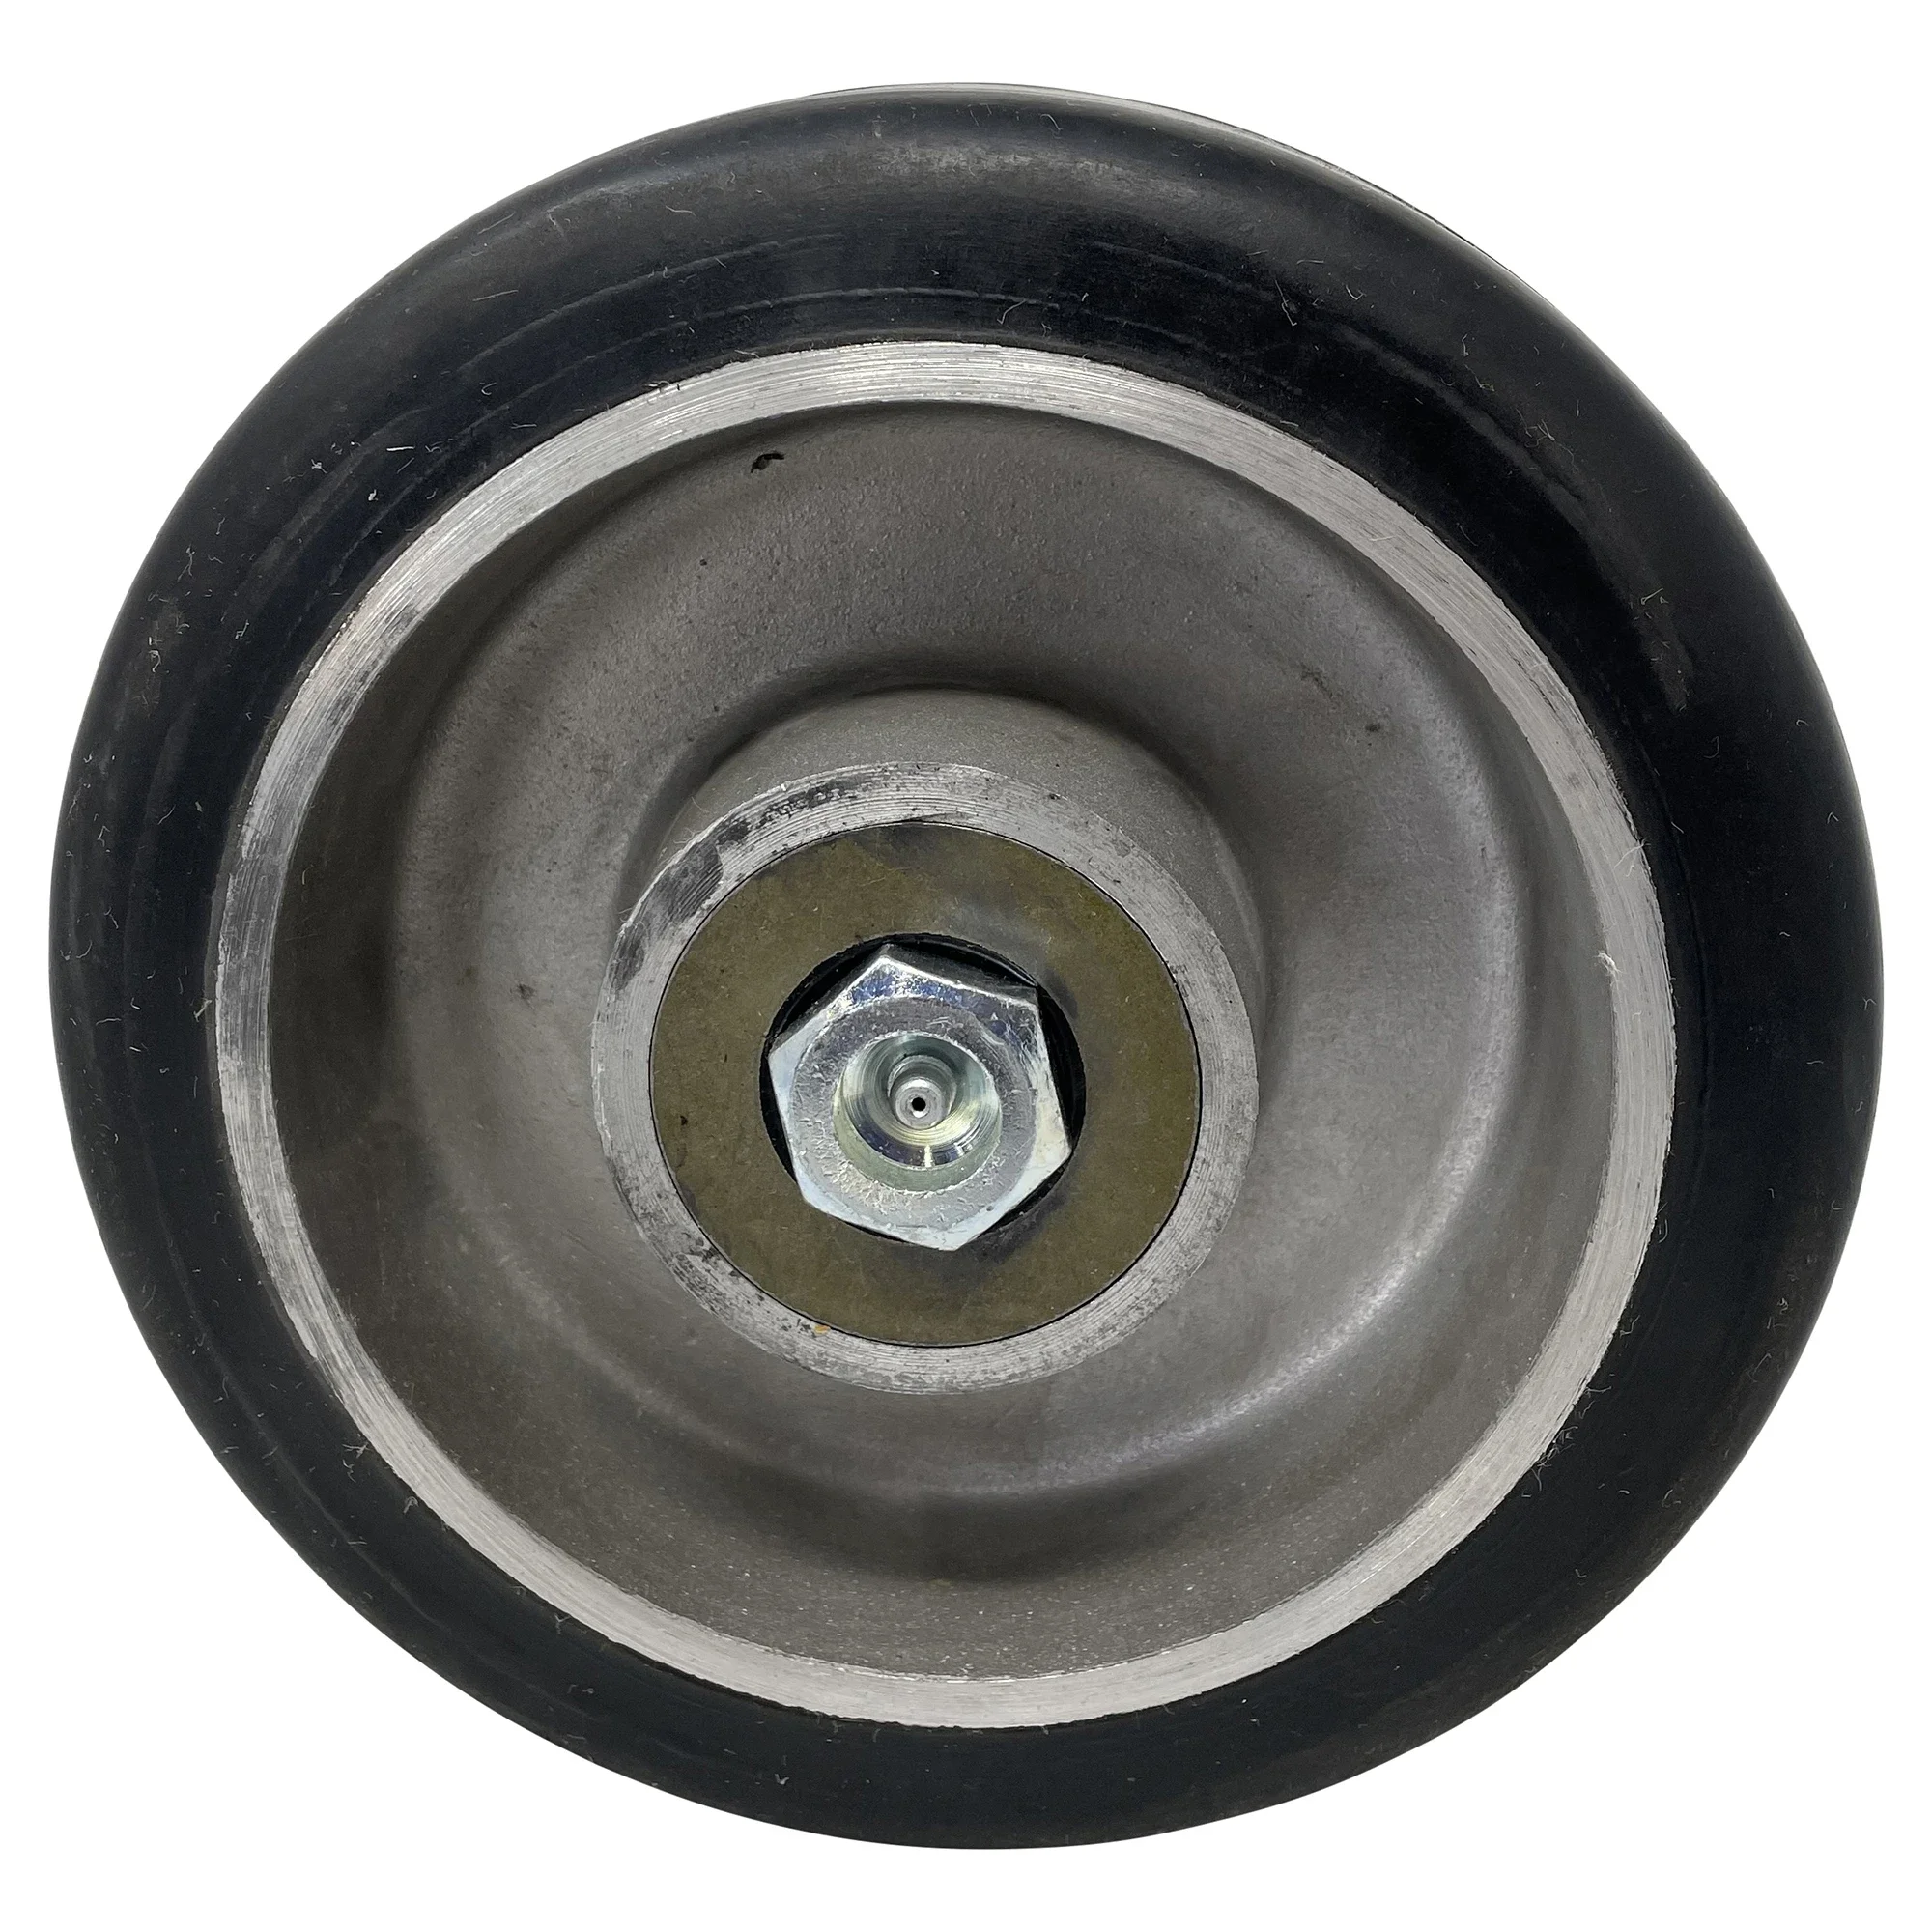 Galbreath™ 8X3 Rubber XHD Wheel - Axle Only